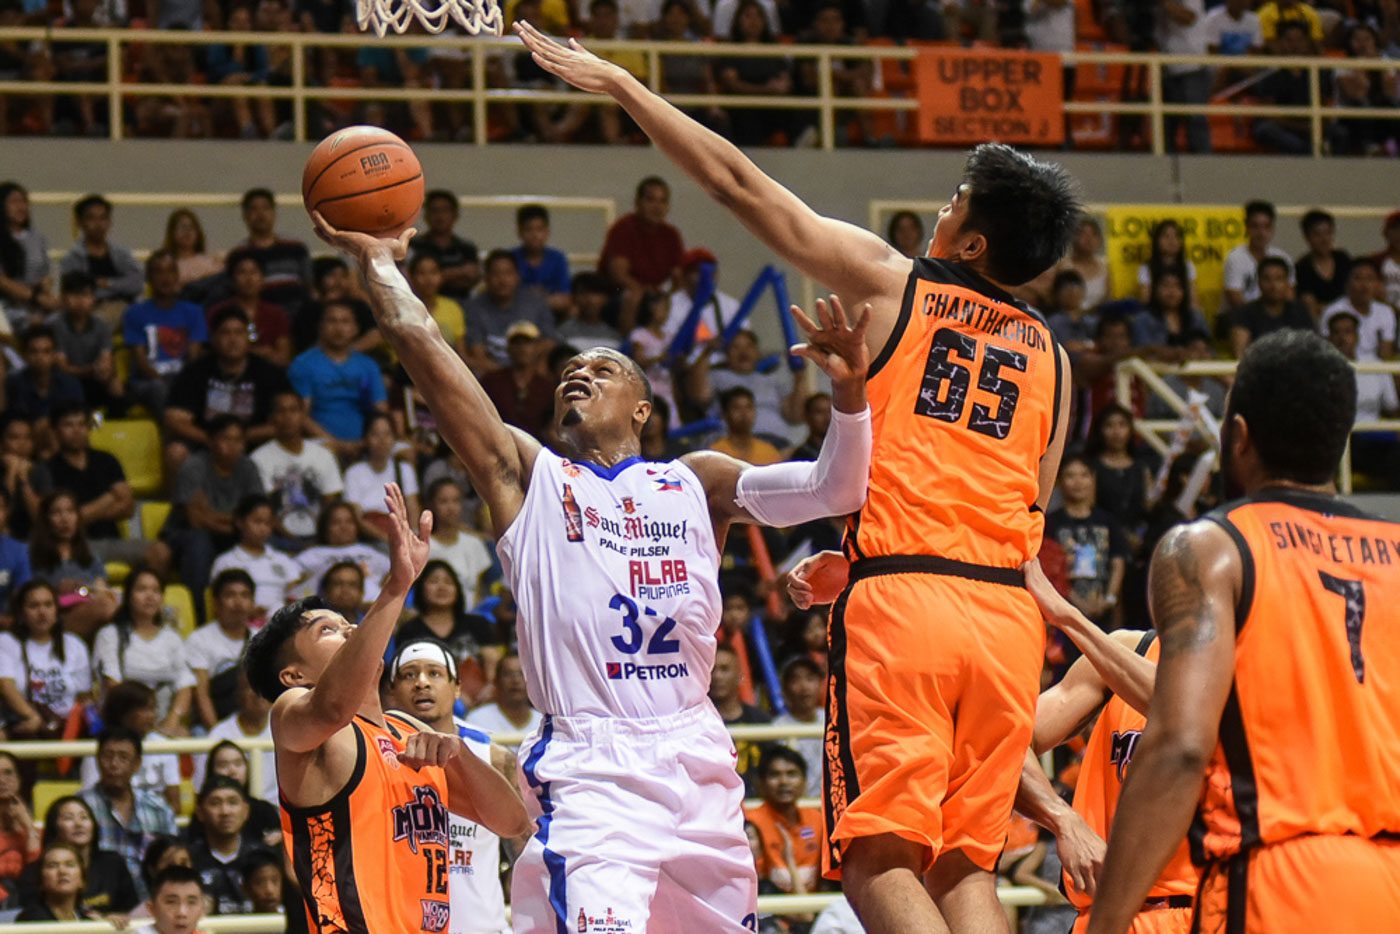 Even after a 46-point explosion, Brownlee counts on Alab teammates